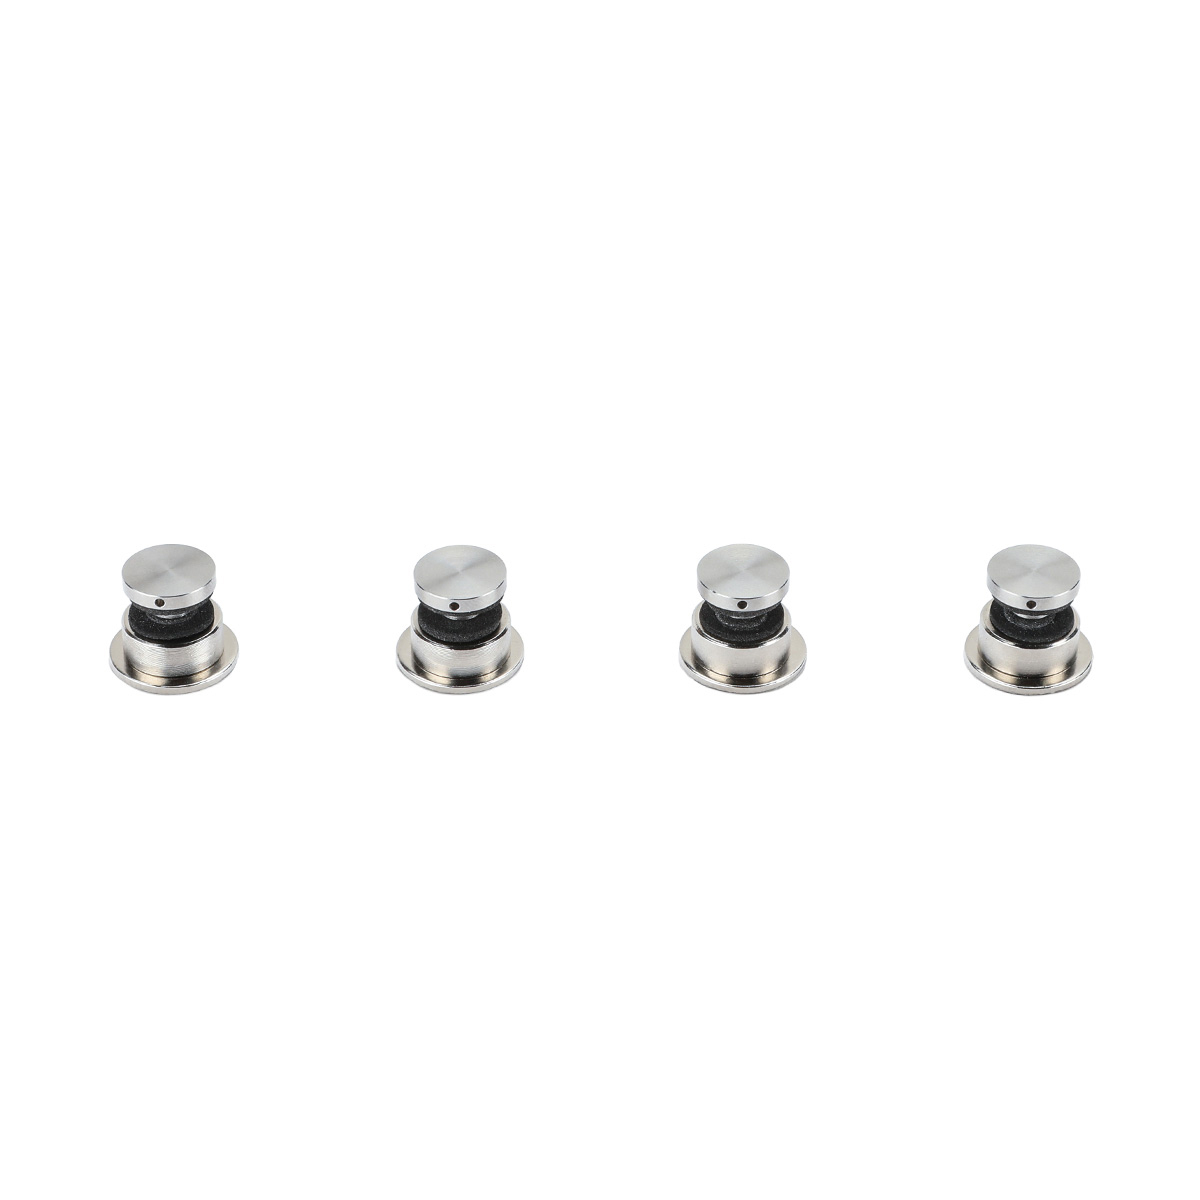 (4)  1/2'' Diameter X 9/16'' Zinc Magnet Barrel, Stainless Steel (304) Head Magnetic Standoffs, Flat Head Satin Brushed Finish, included Screw and Anchors (for Inside Use) Material Thick. Accepted 5/16'' to 3/8'' [Required Material Hole Size: 1/4'']